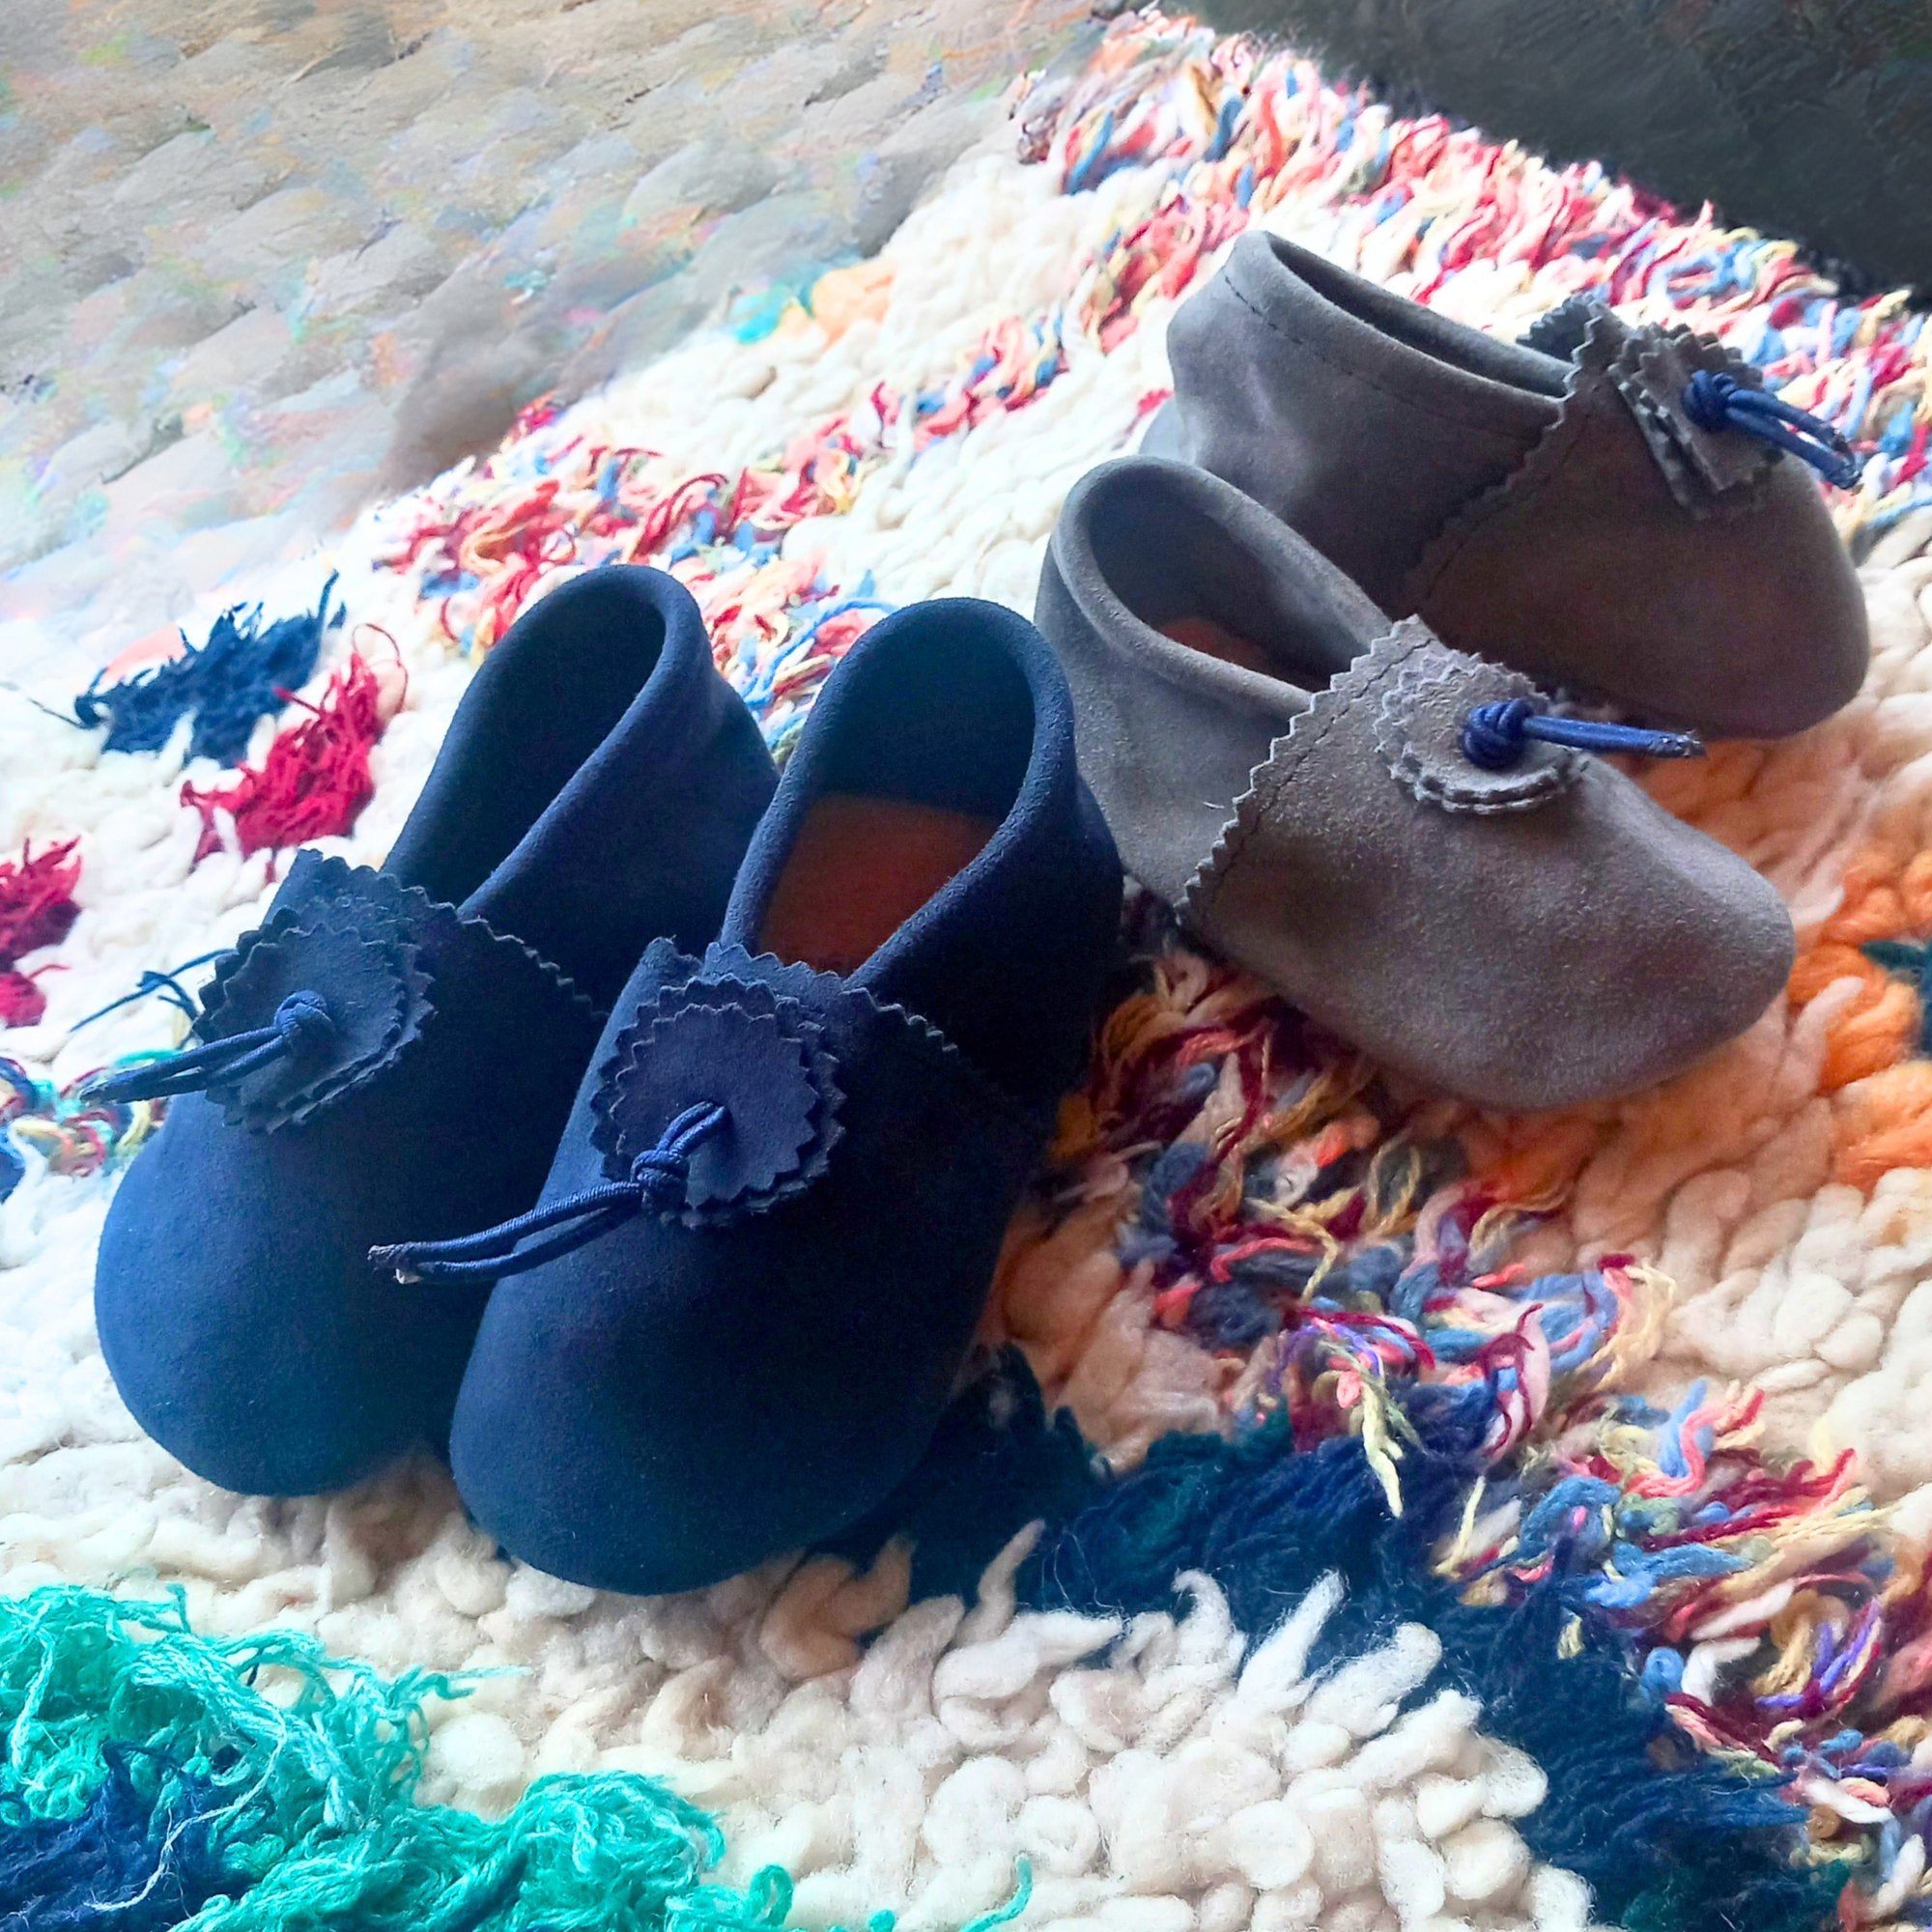 Suede Baby Slippers - Navy - Artisan Stories